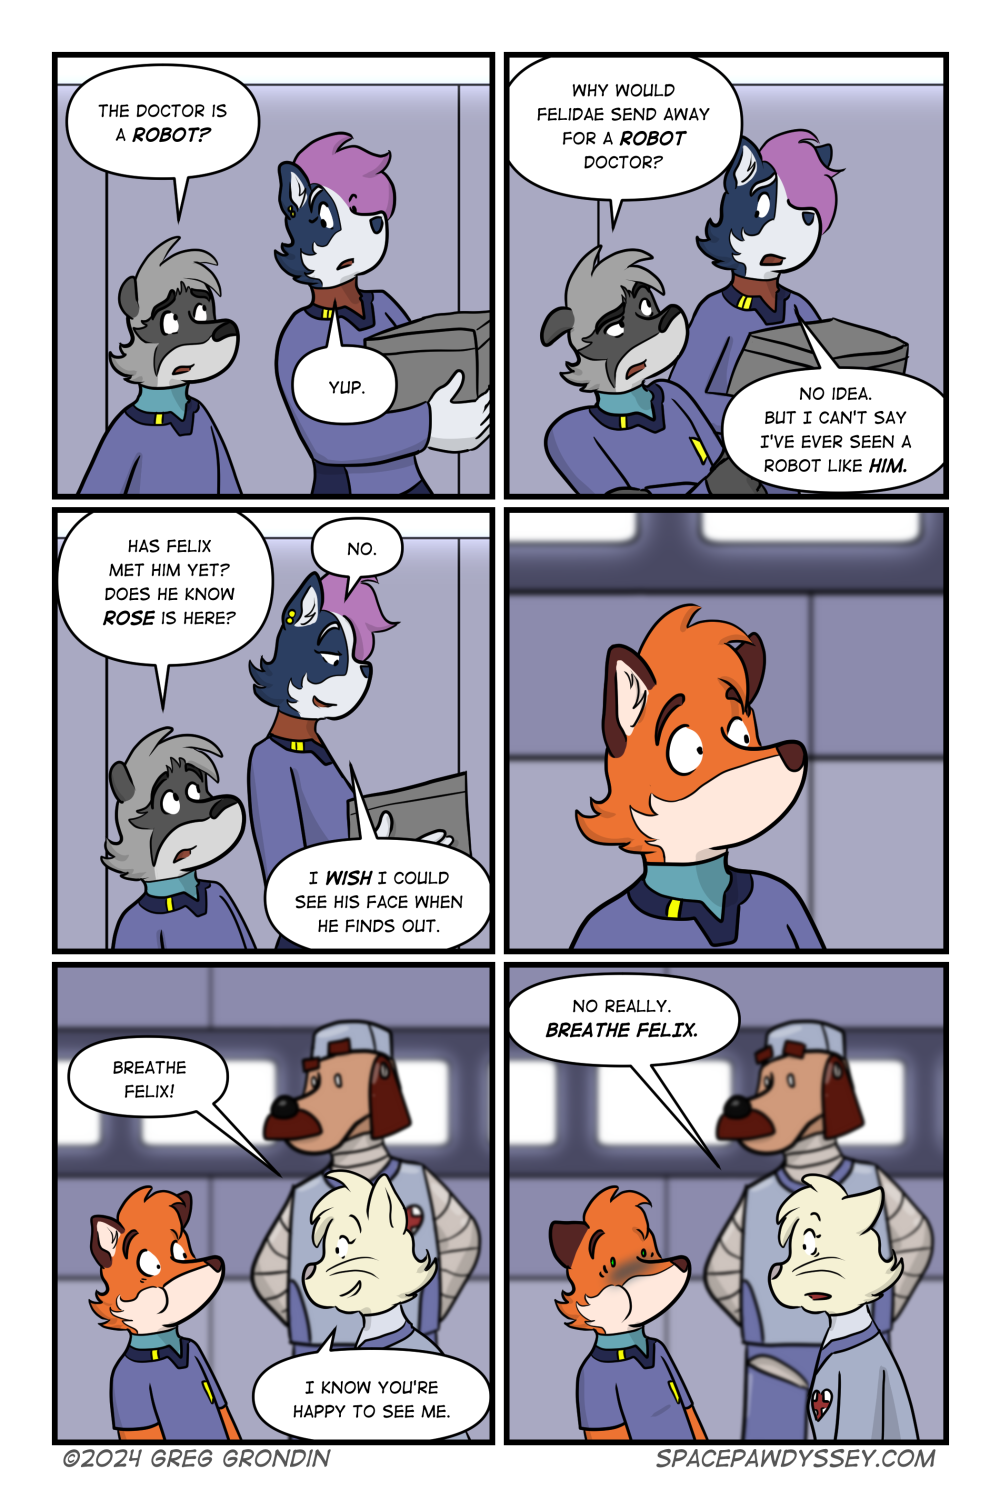 Space Pawdyssey #657